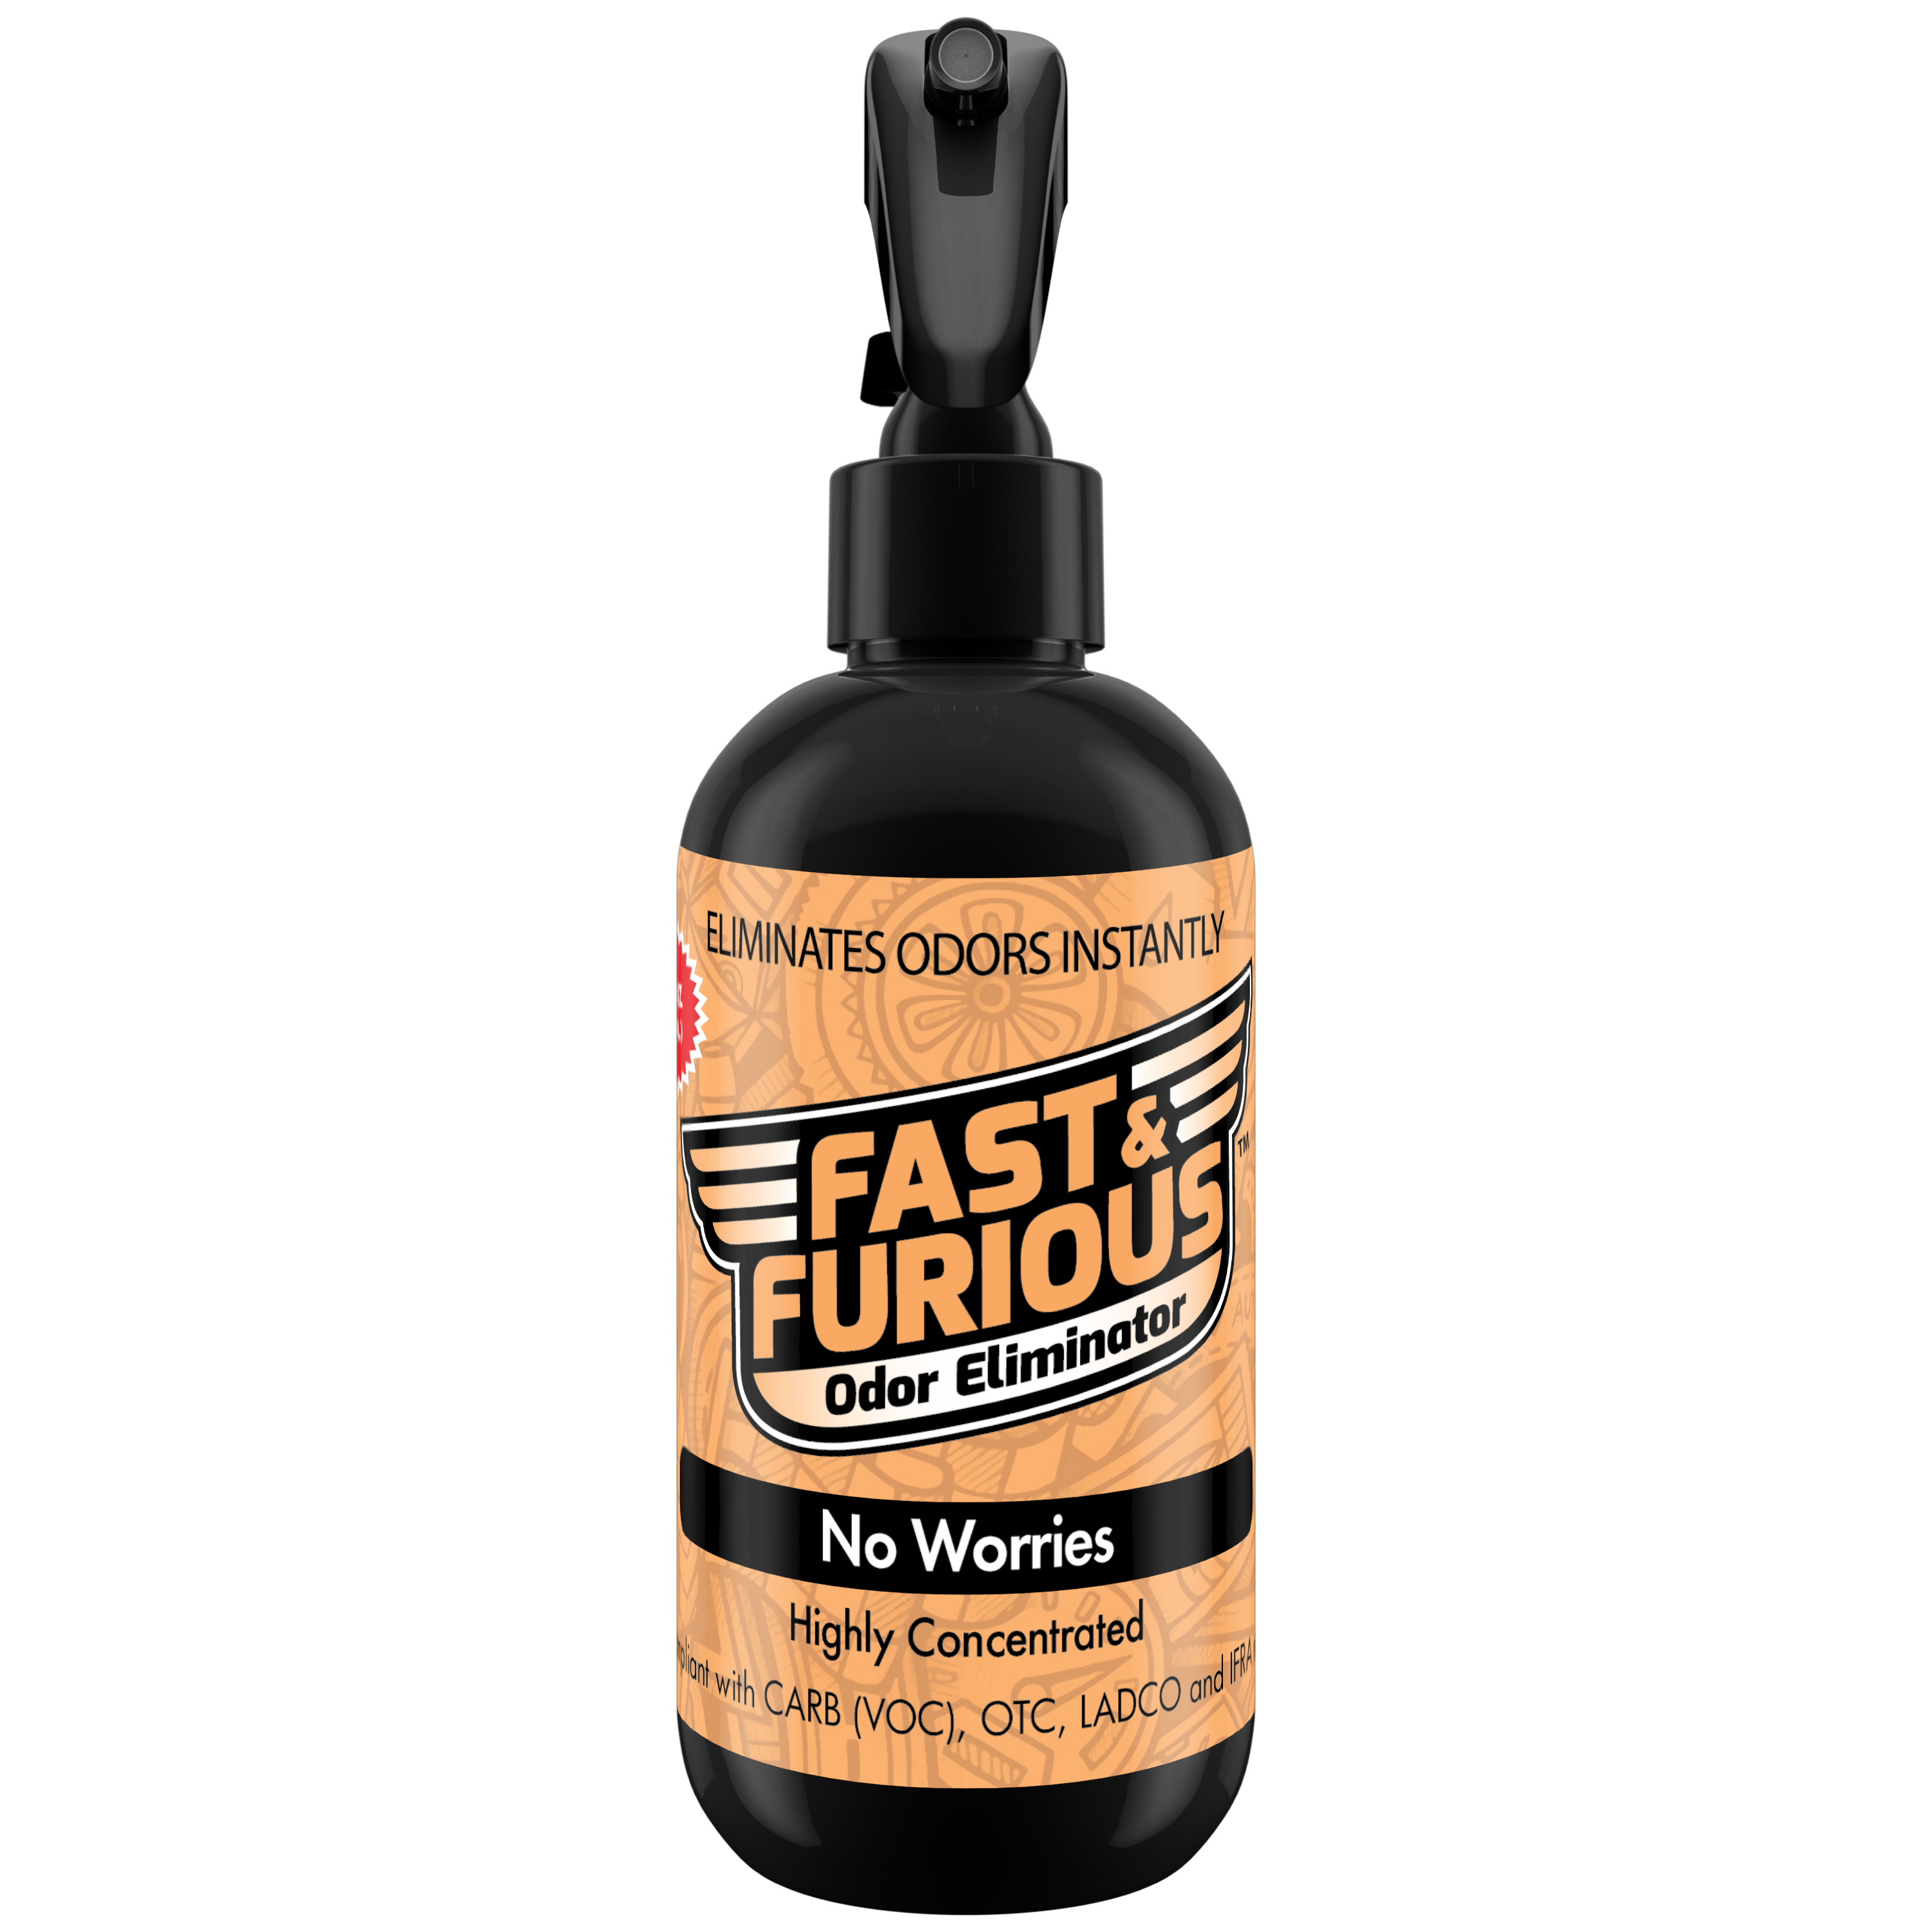 Fast and Furious Odor Eliminator - No Worries Scent